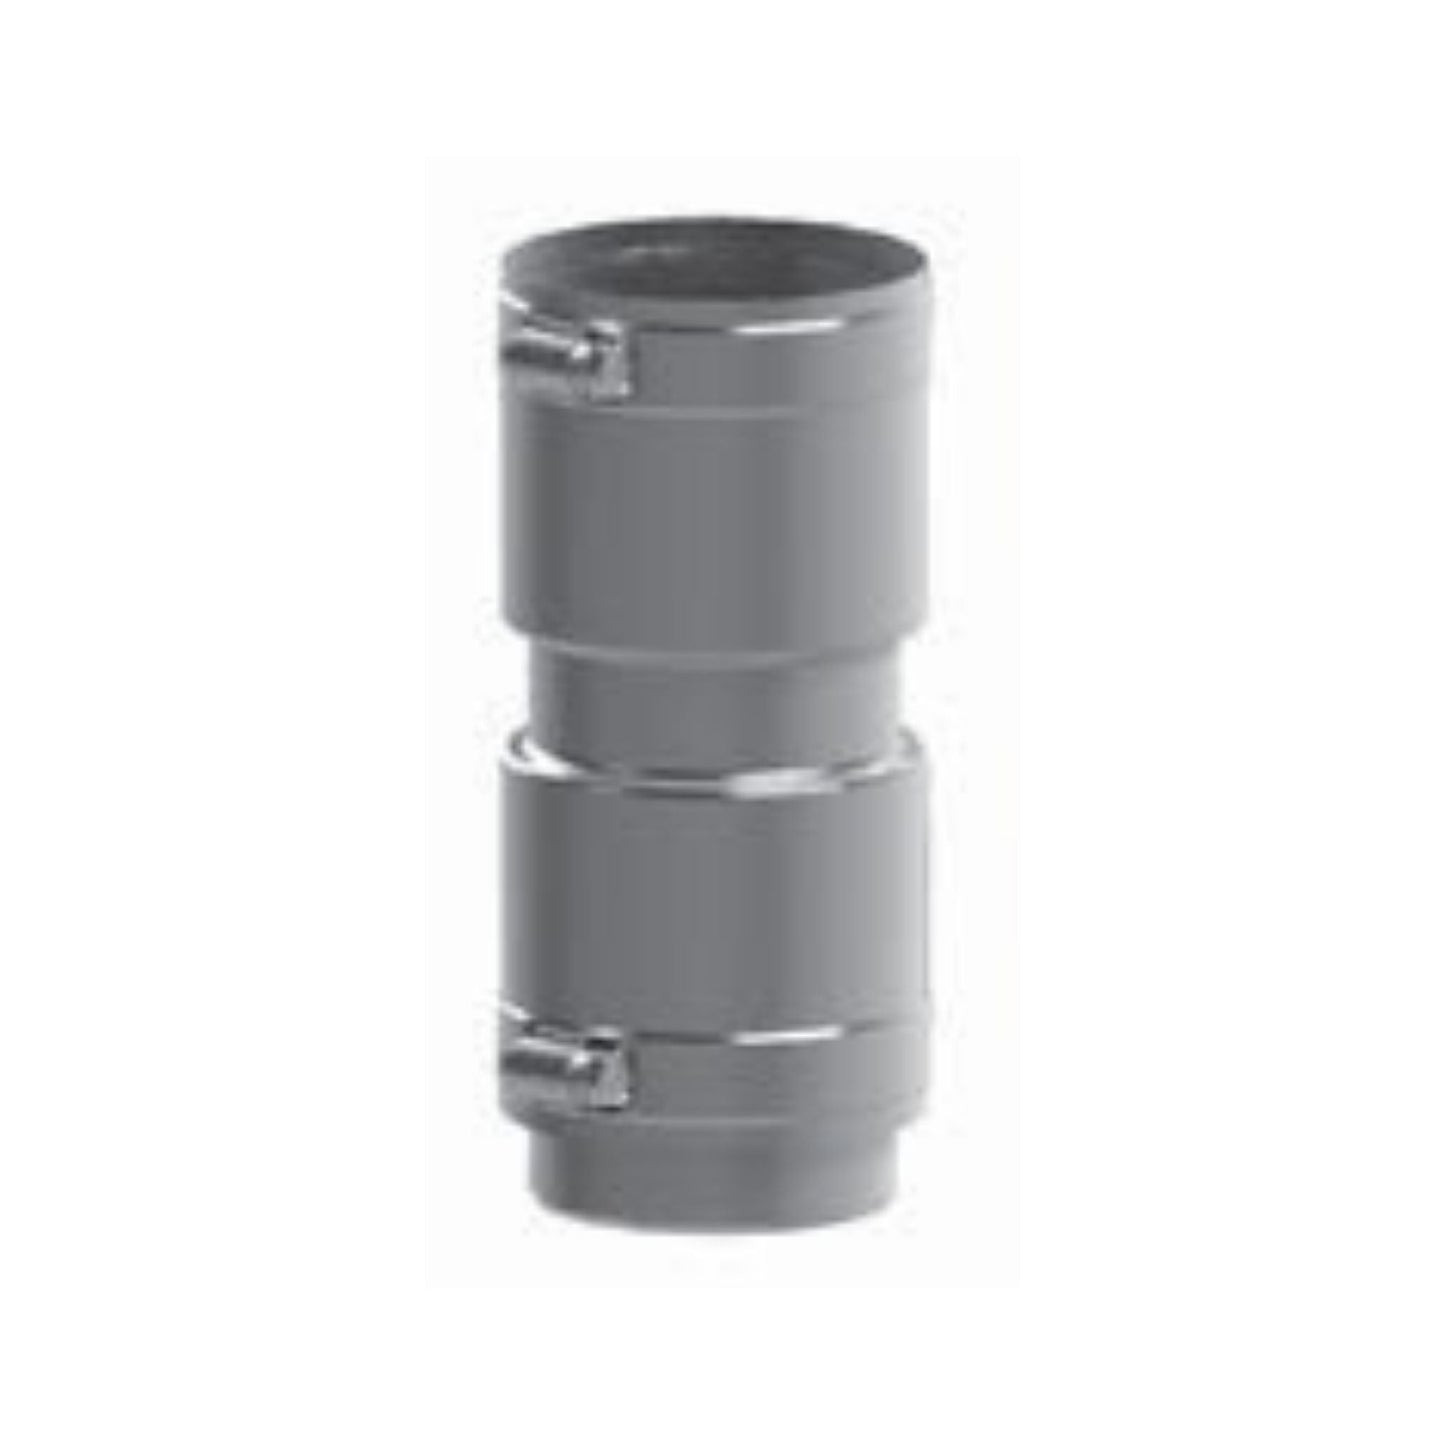 DuraVent FasNSeal Flex 6" 316L Stainless Steel Coupler